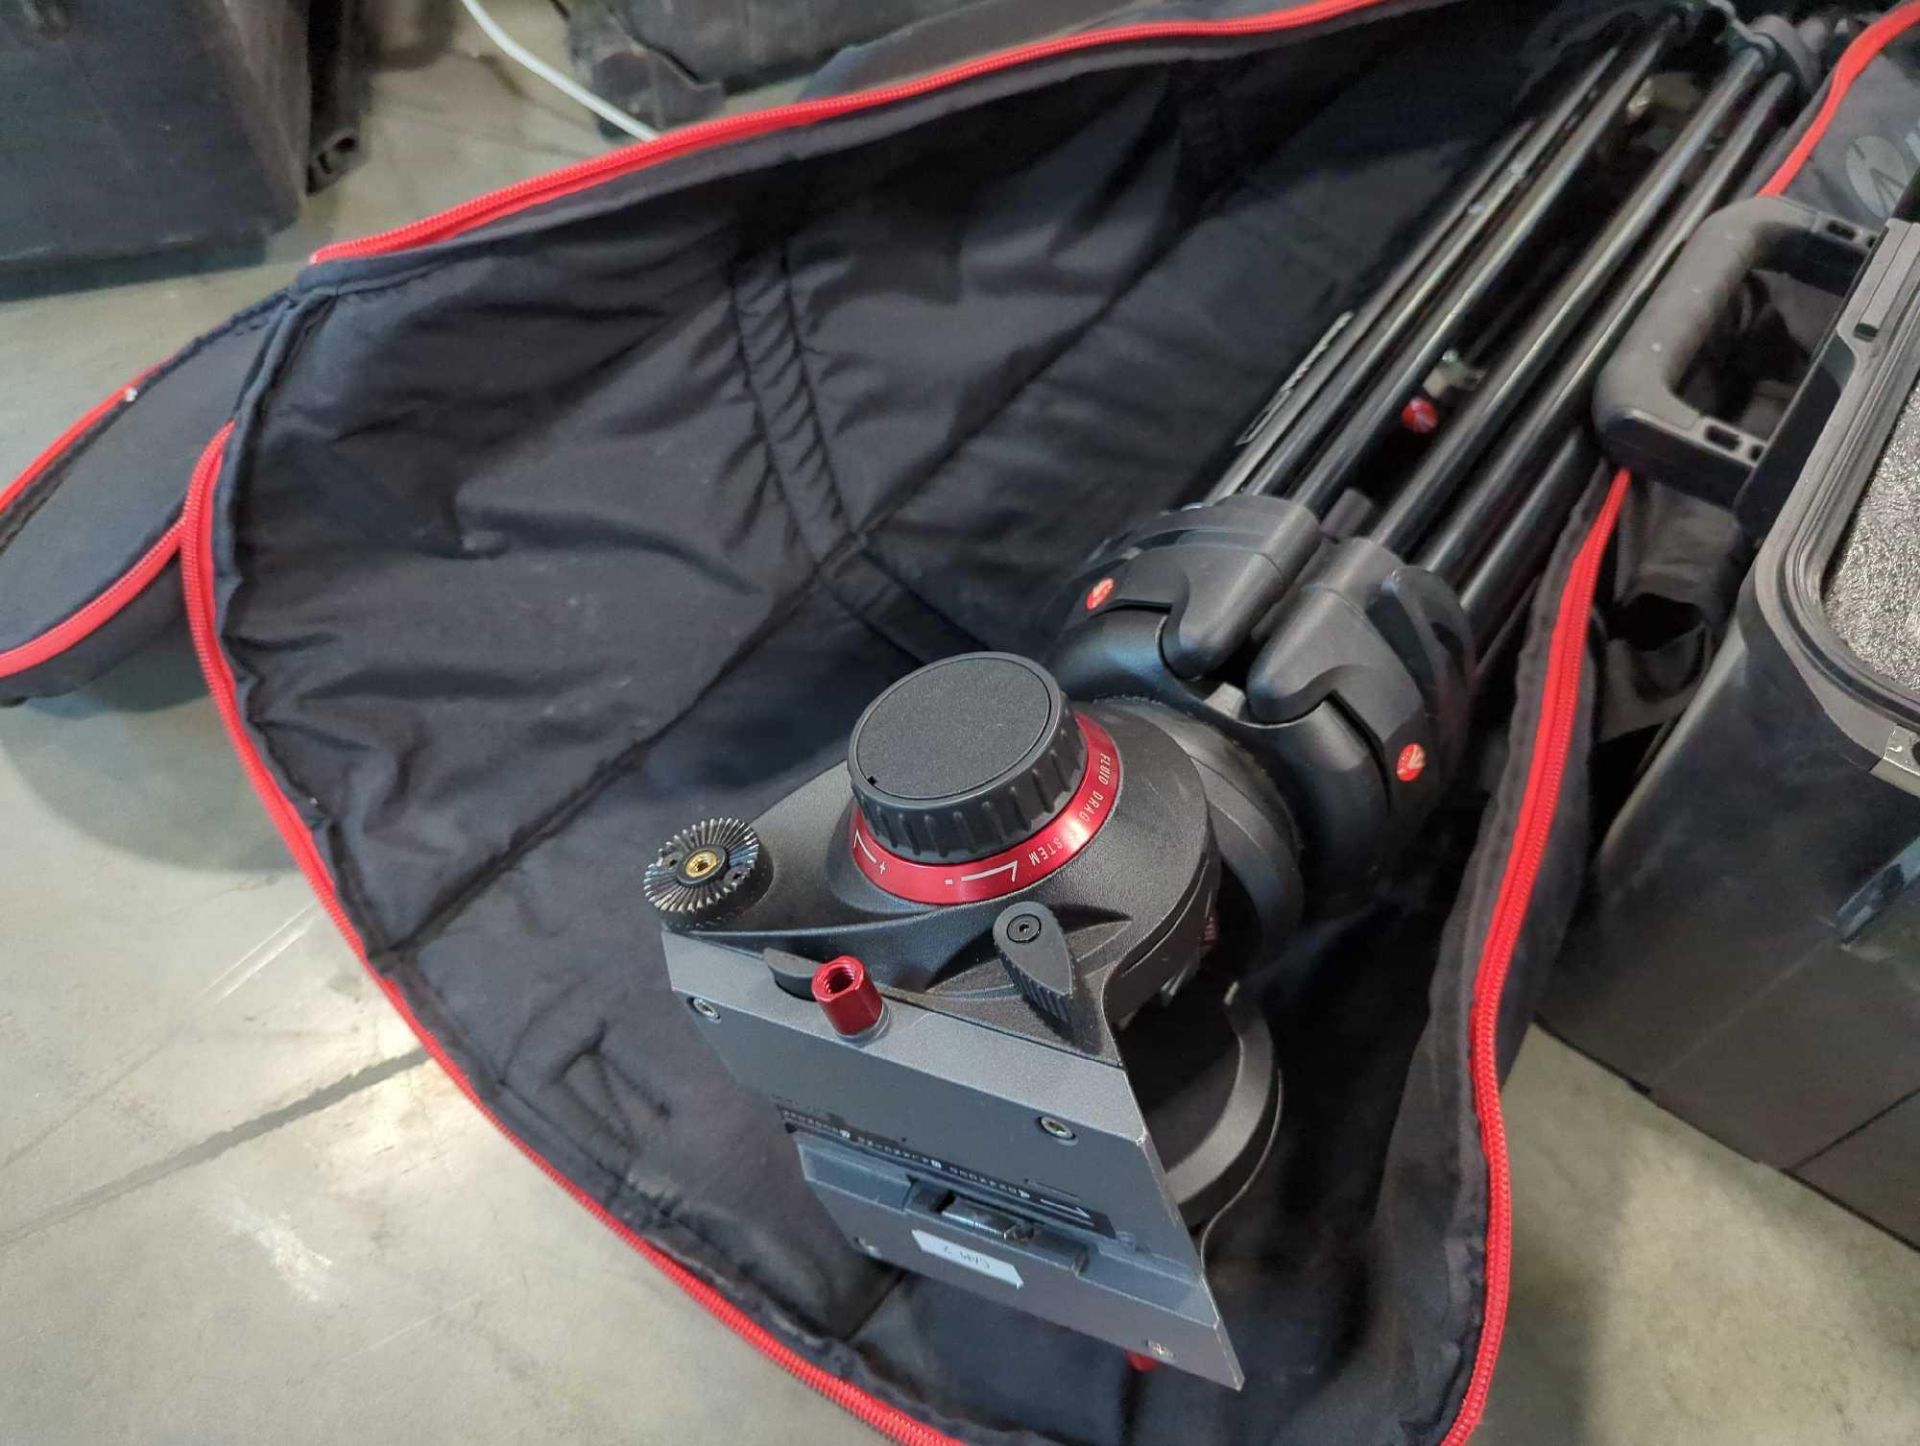 Ikan Teleprompter, manfrotto tripod, and more - Image 4 of 25